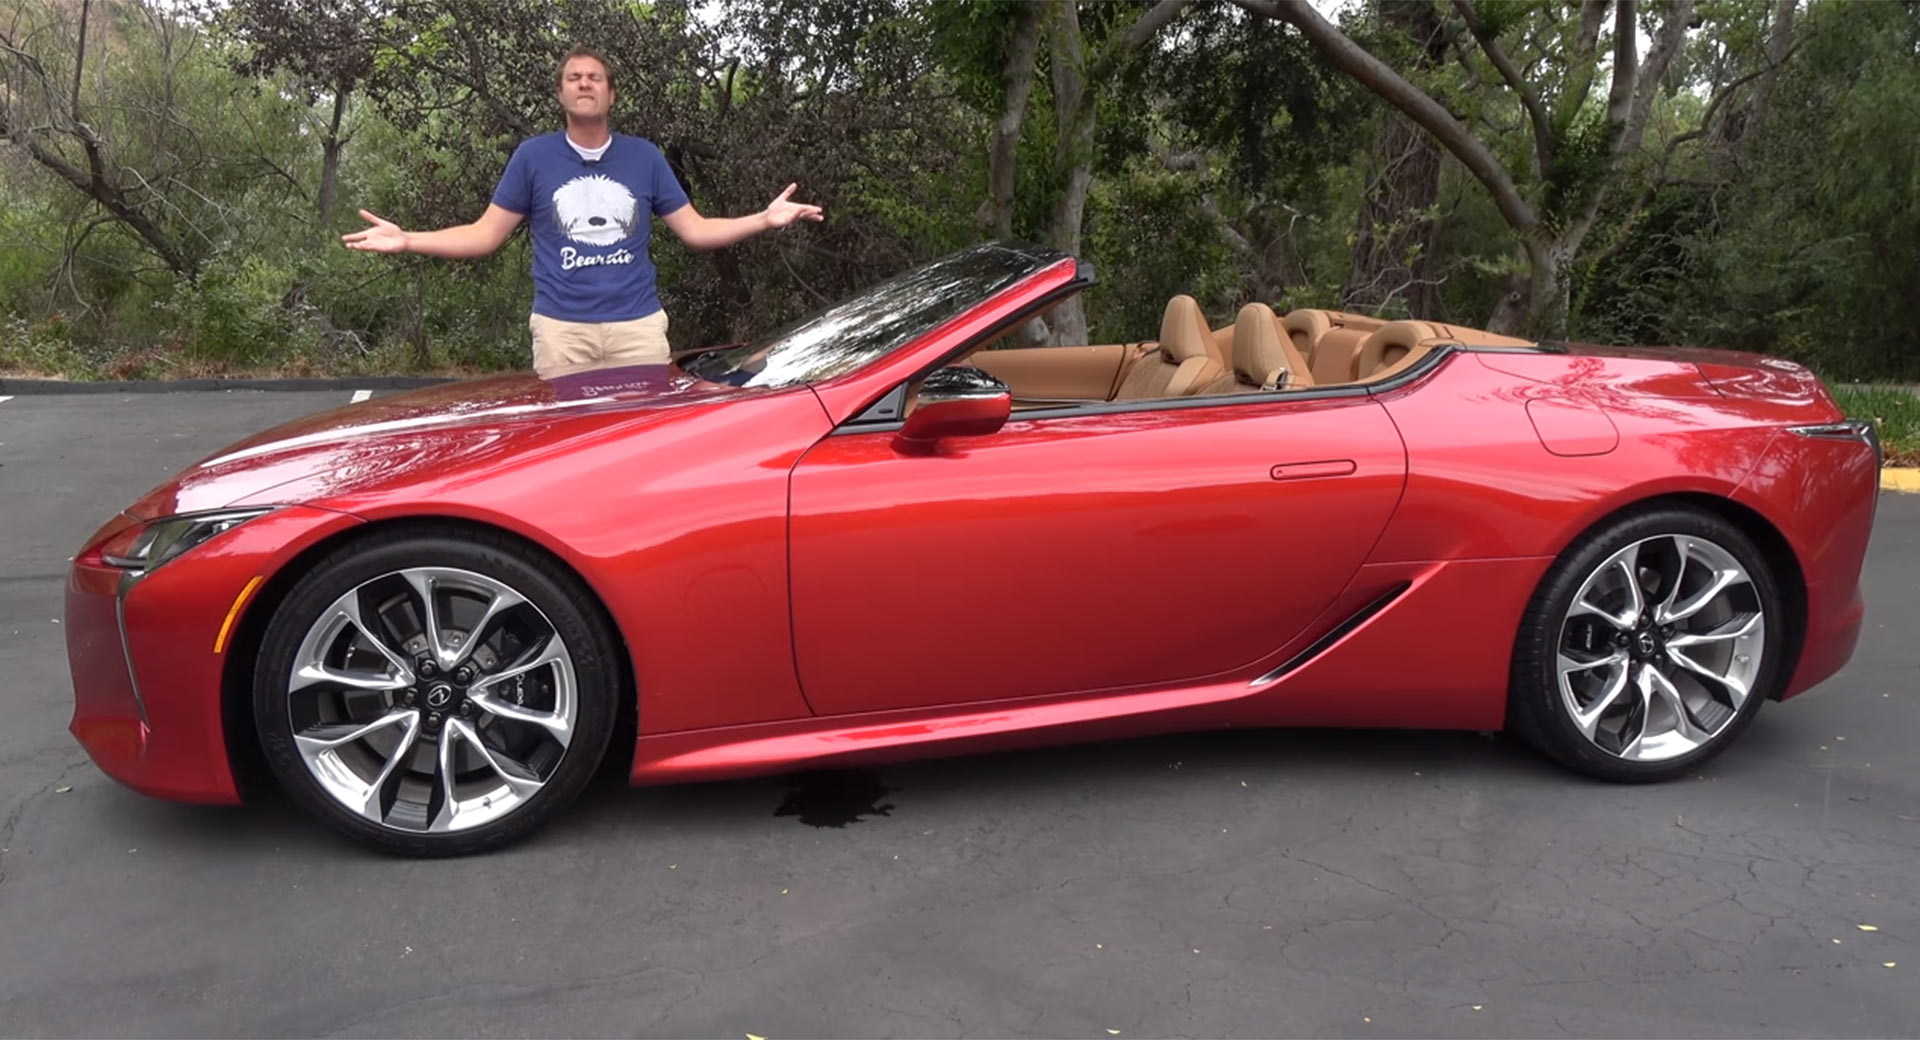 The 2021 Lexus Lc 500 Convertible Oozes Sex Appeal Cars News Magazine